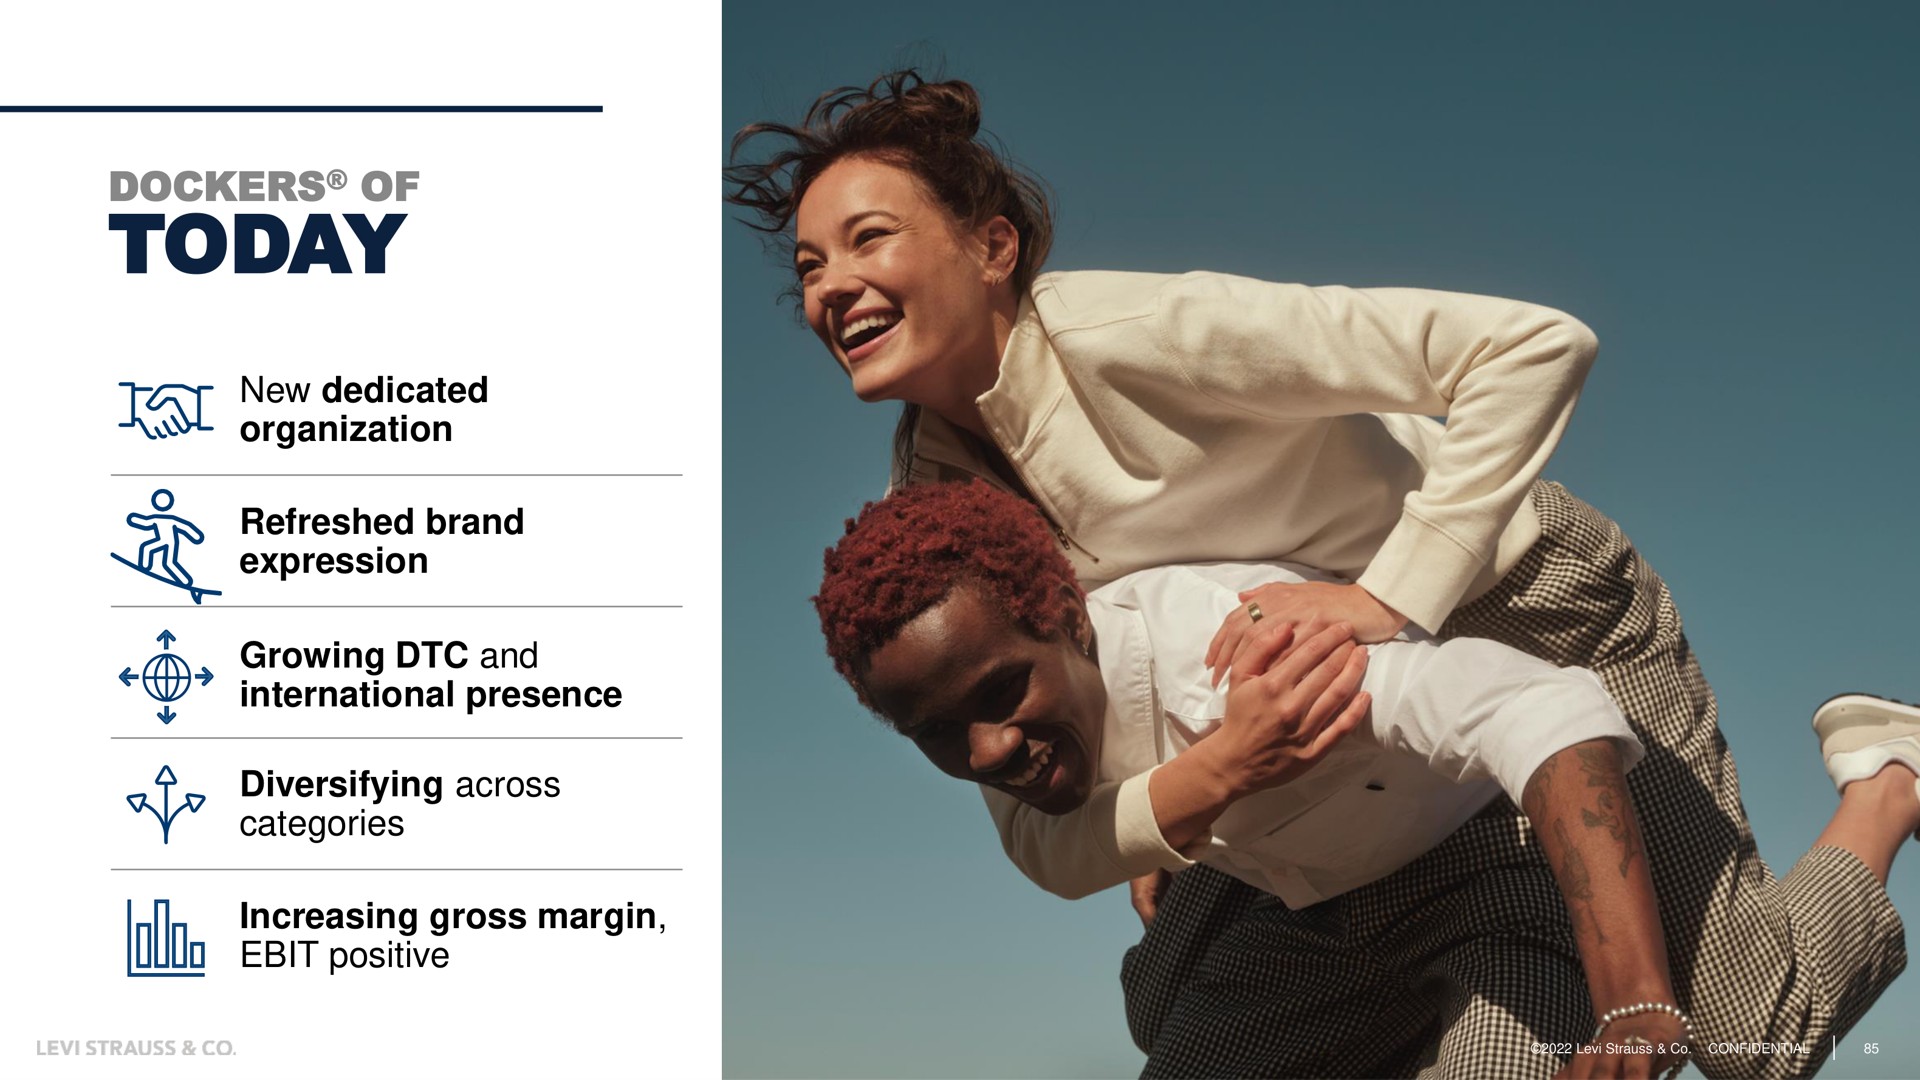 dockers of today new dedicated organization refreshed brand expression international presence growing and positive diversifying across categories increasing gross margin | Levi Strauss